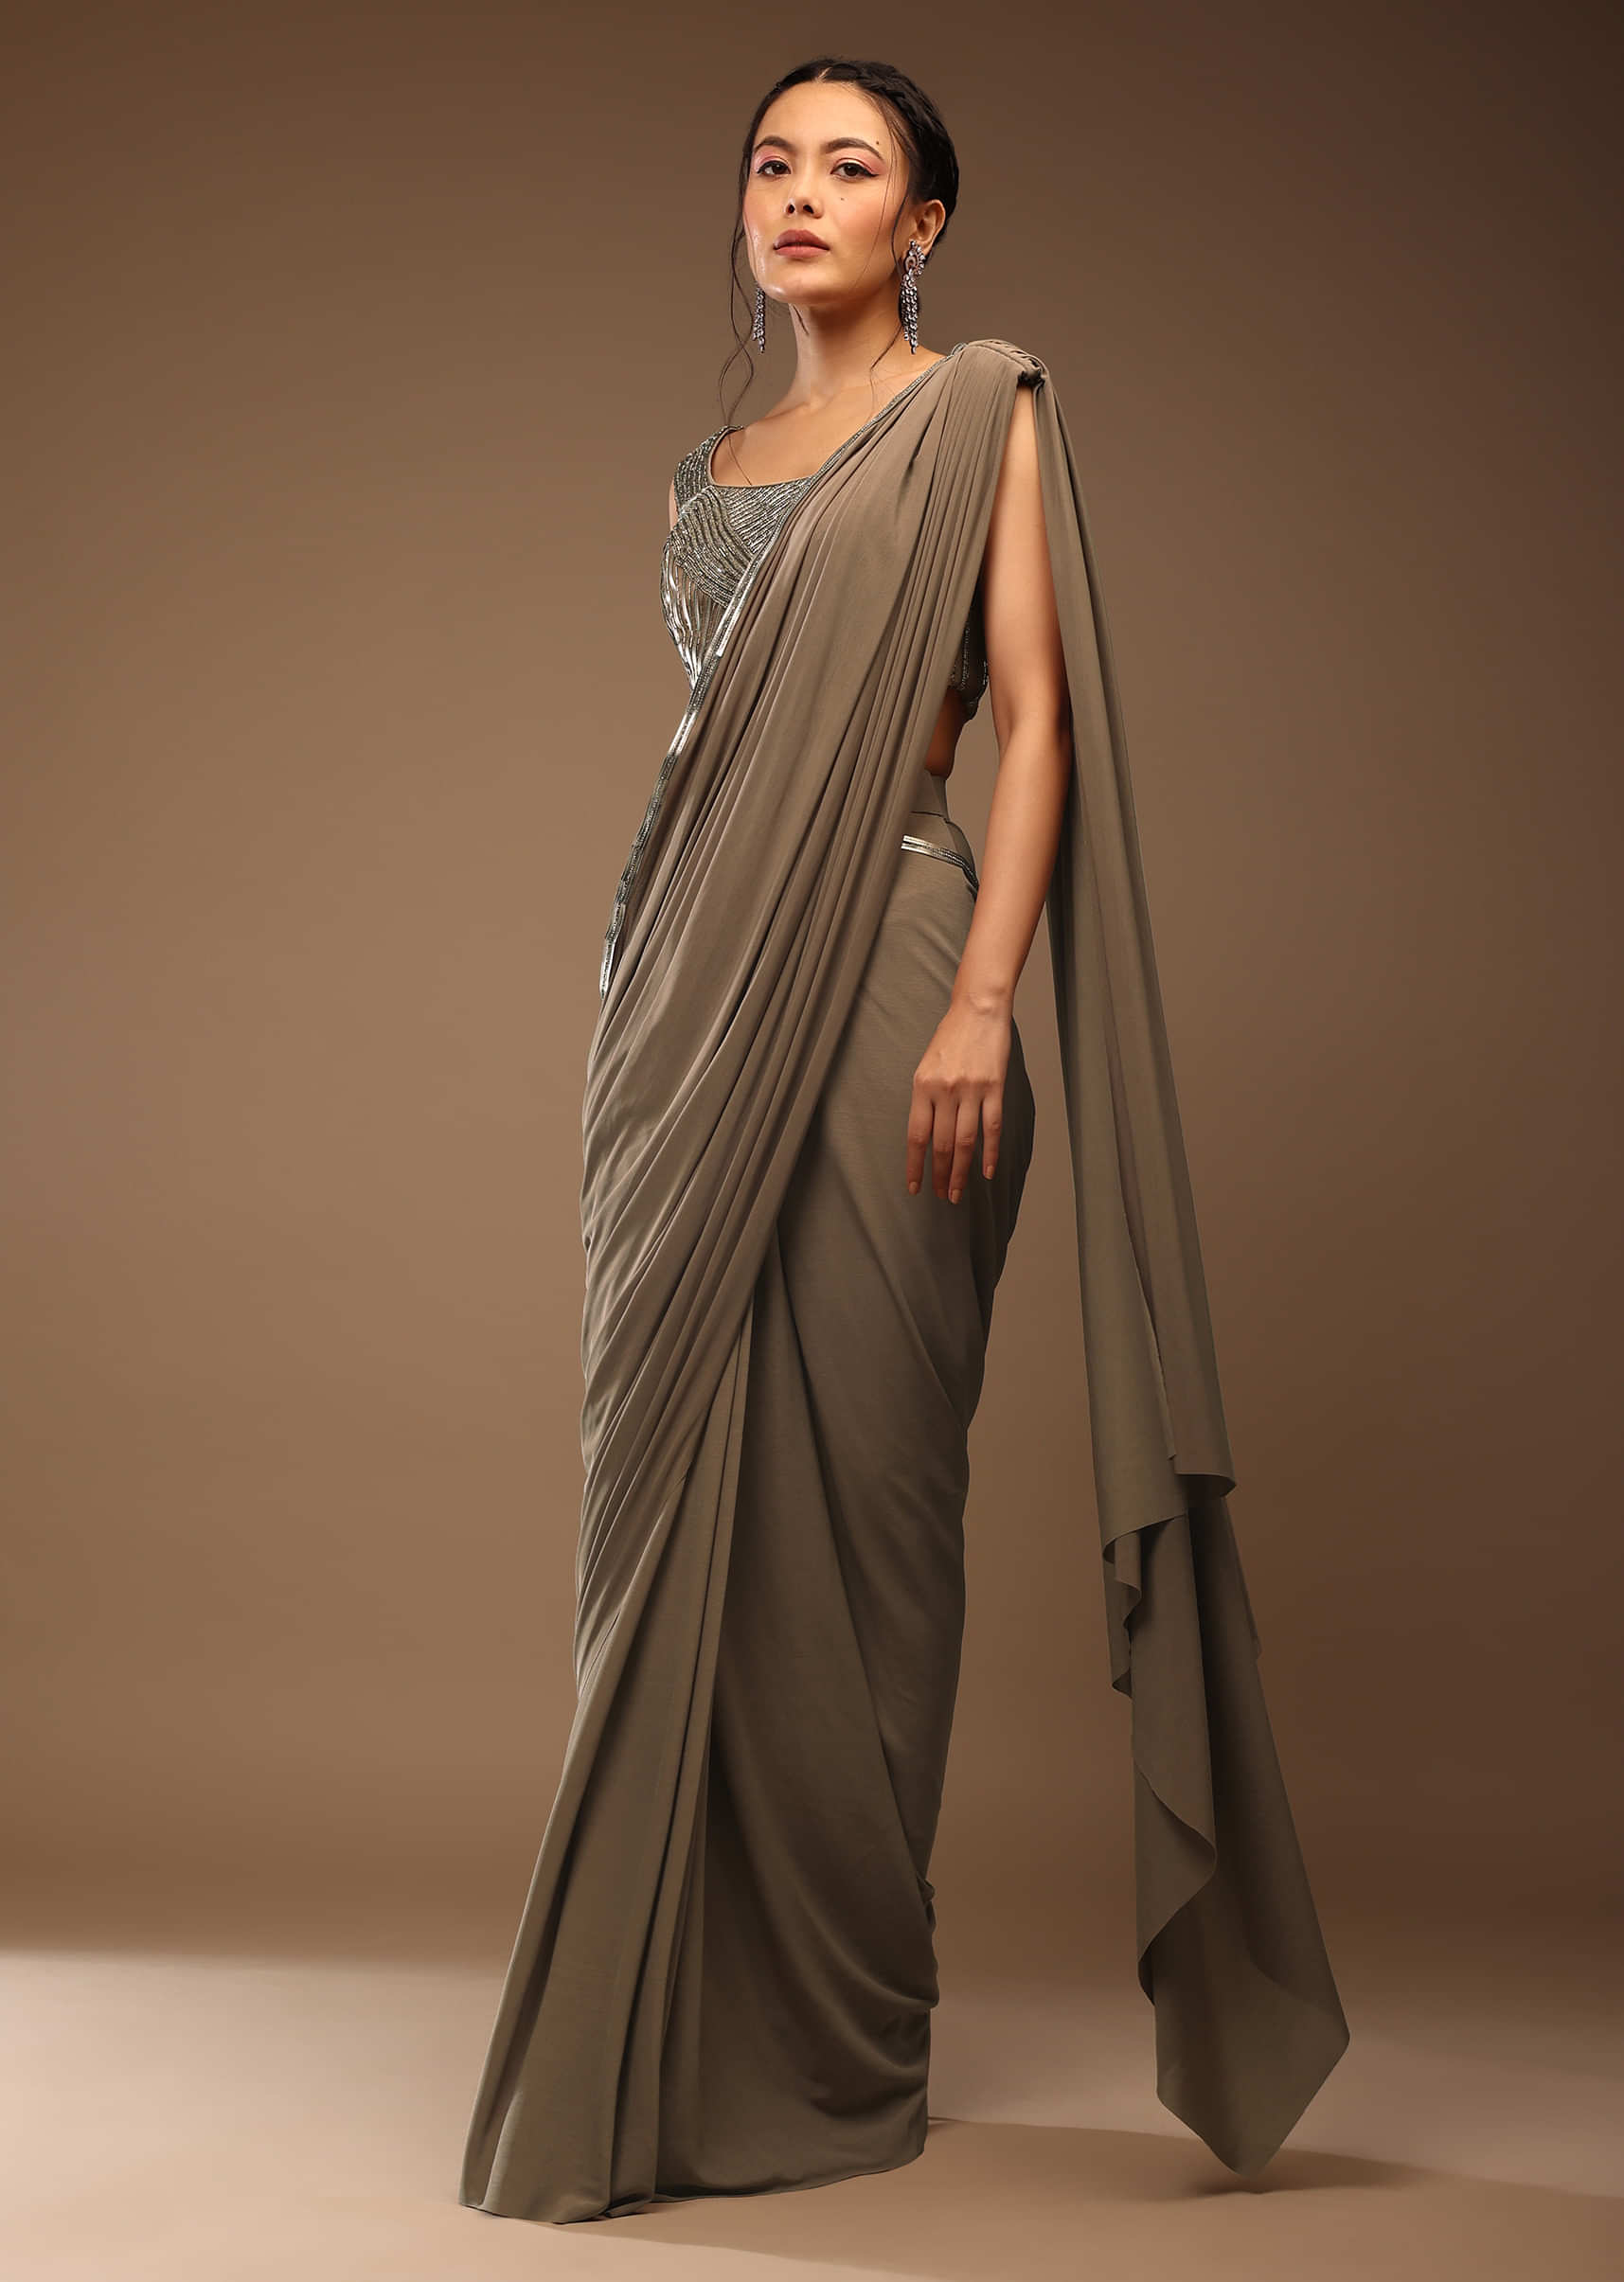 Taupe Grey Ready-Pleated Saree With A Crop Top In Foil Applique Embellishment Sleeveless With A Tie-Up Tassel Dori At The Back.